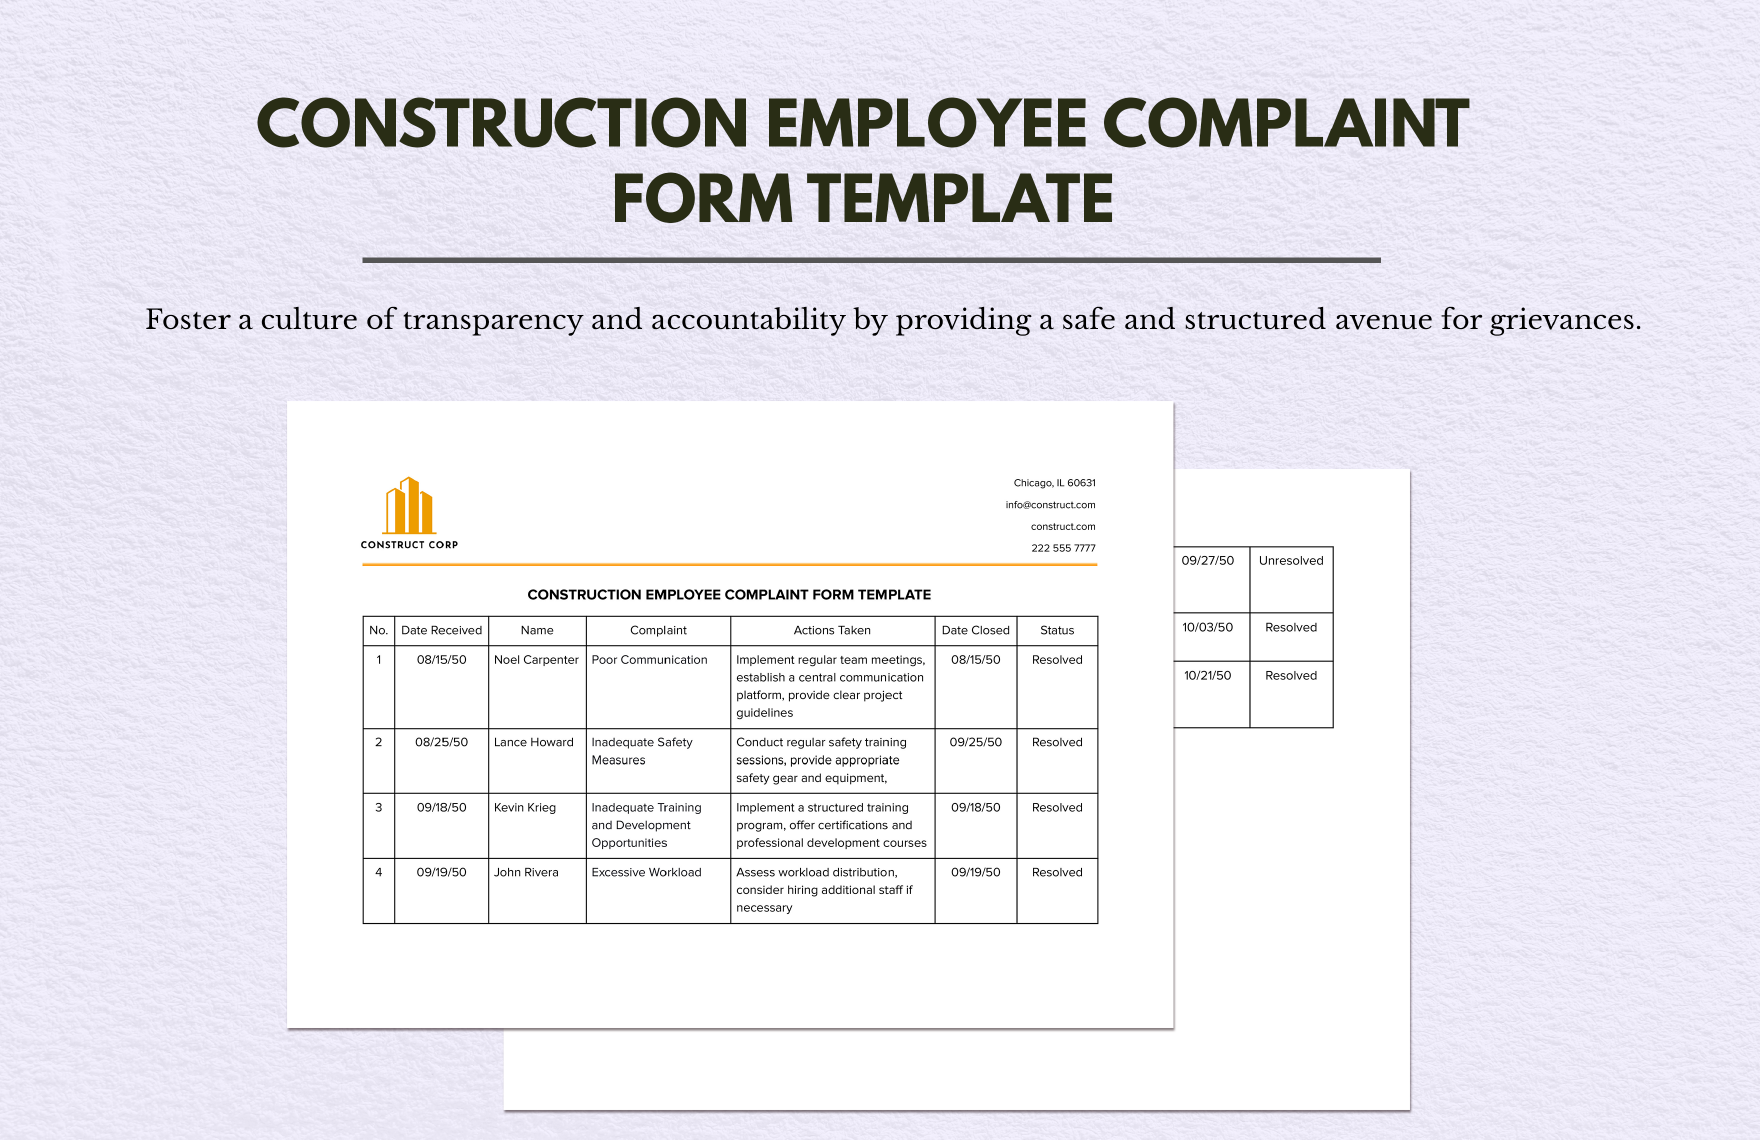 Construction Employee Complaint Form in Word, Google Docs